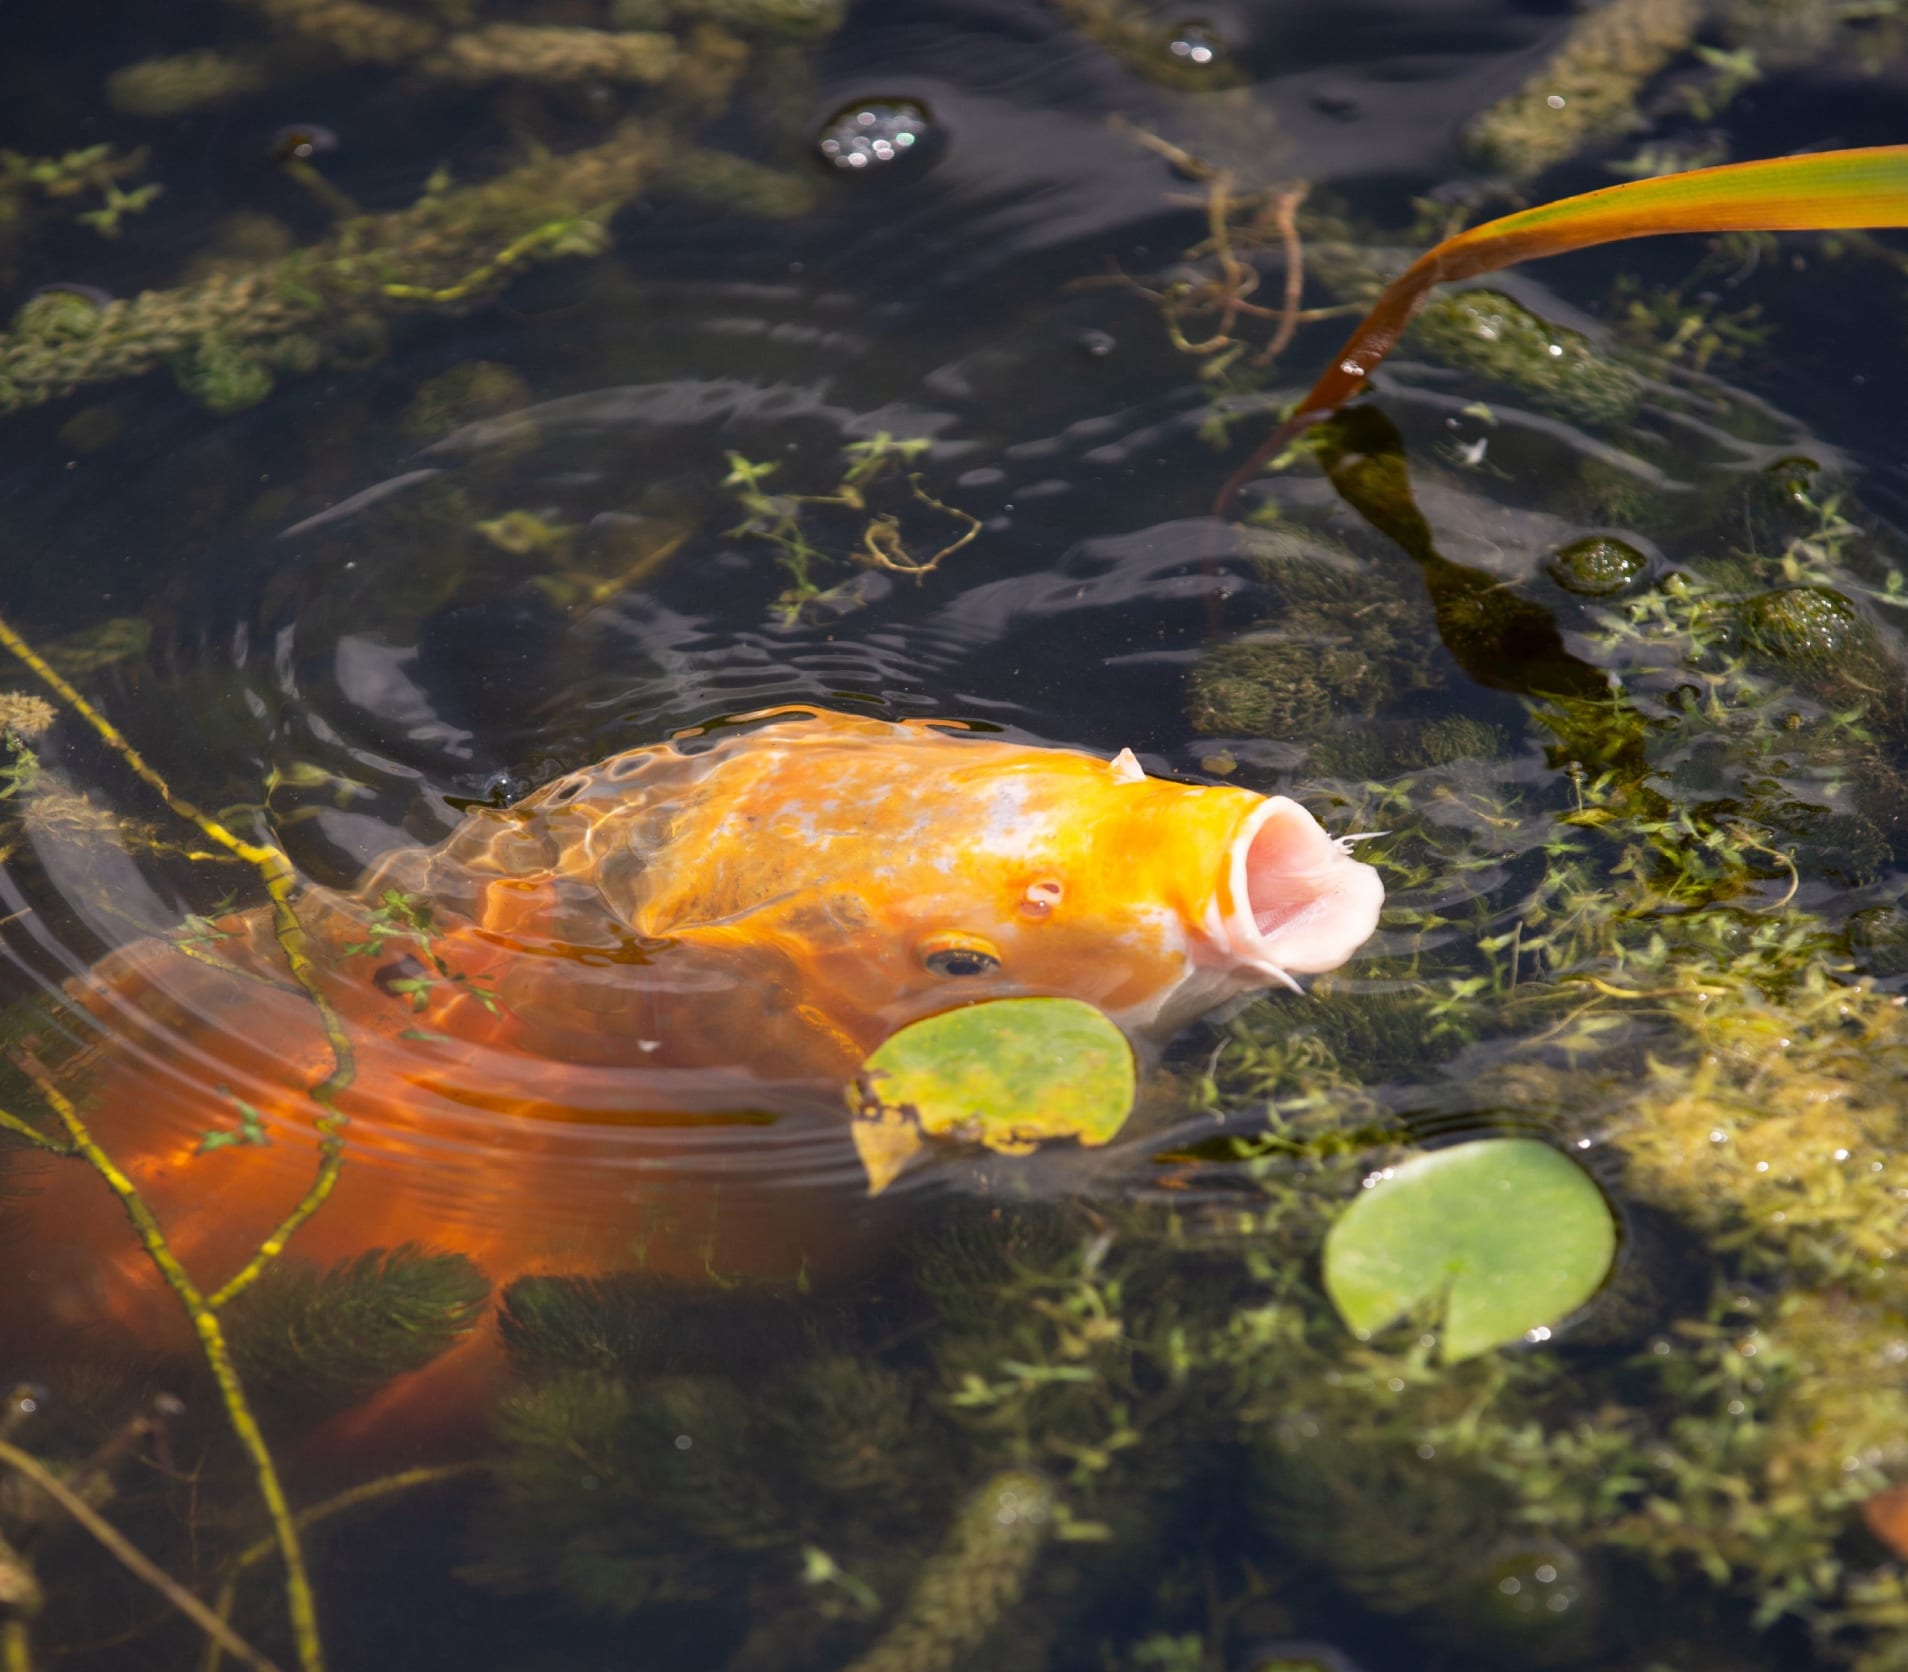 A koi fish in a pond with it